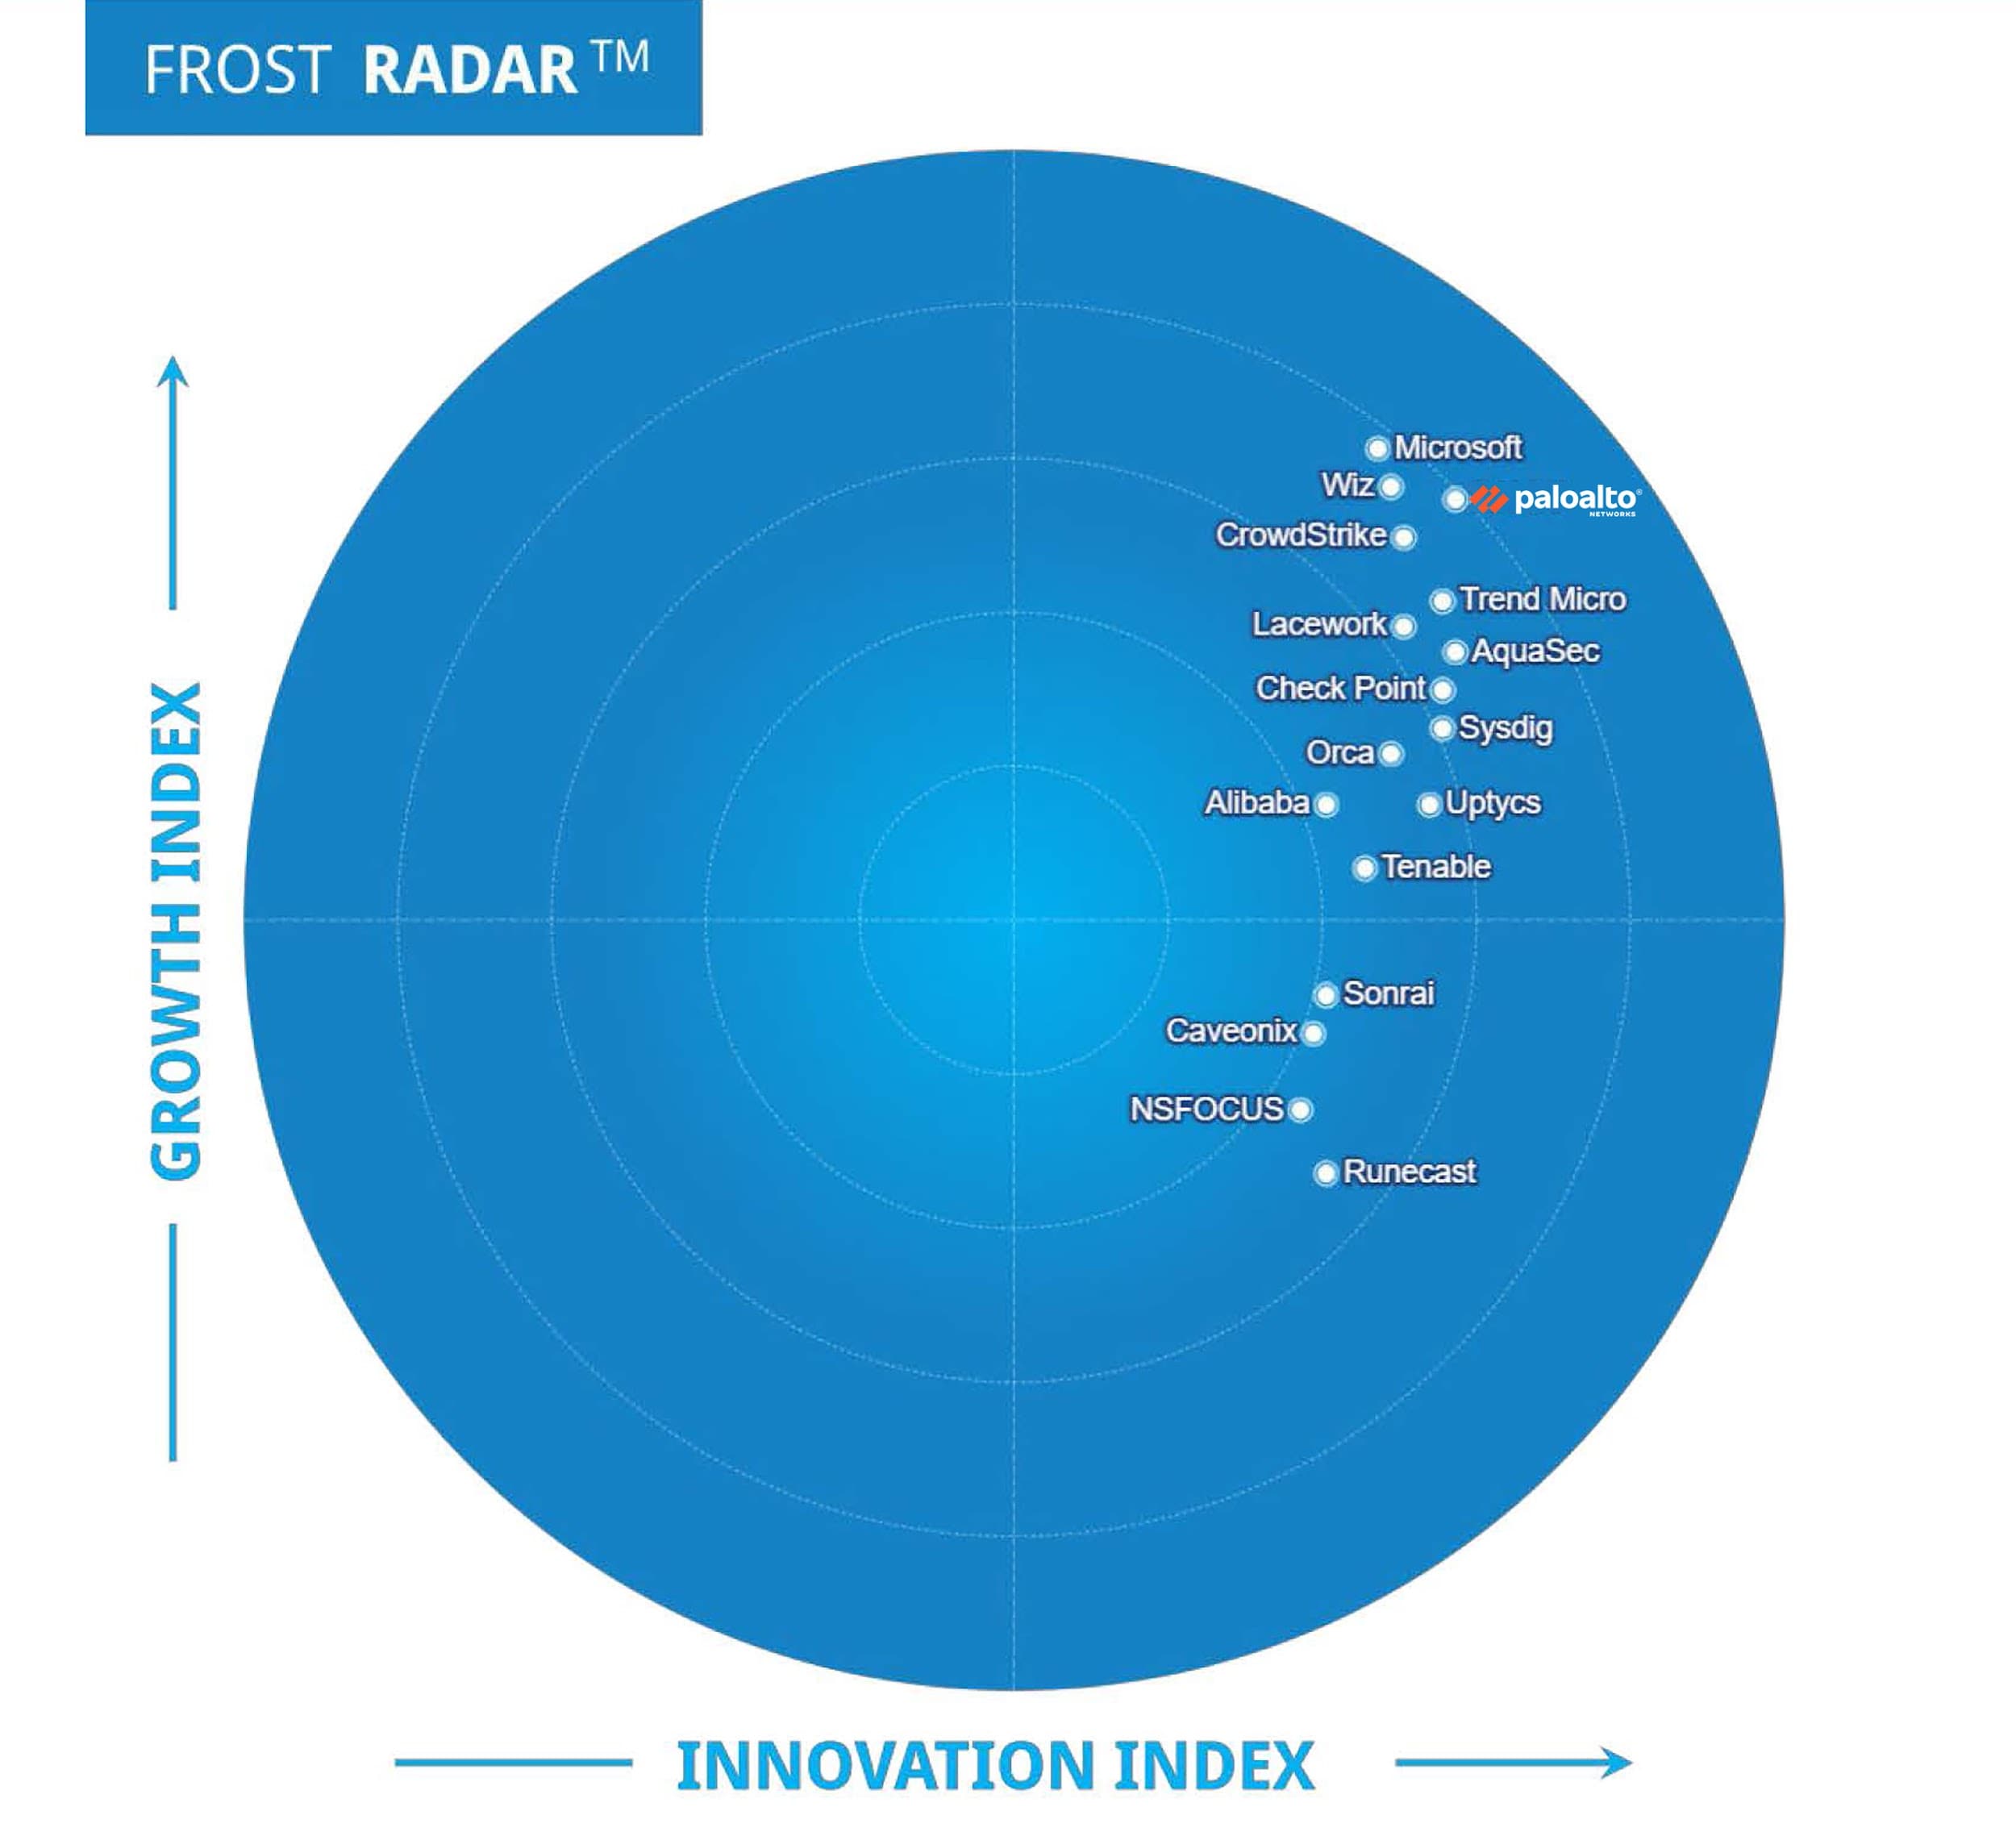 Palo Alto Networks is plotted as a Leader in Growth and excels in Innovation.